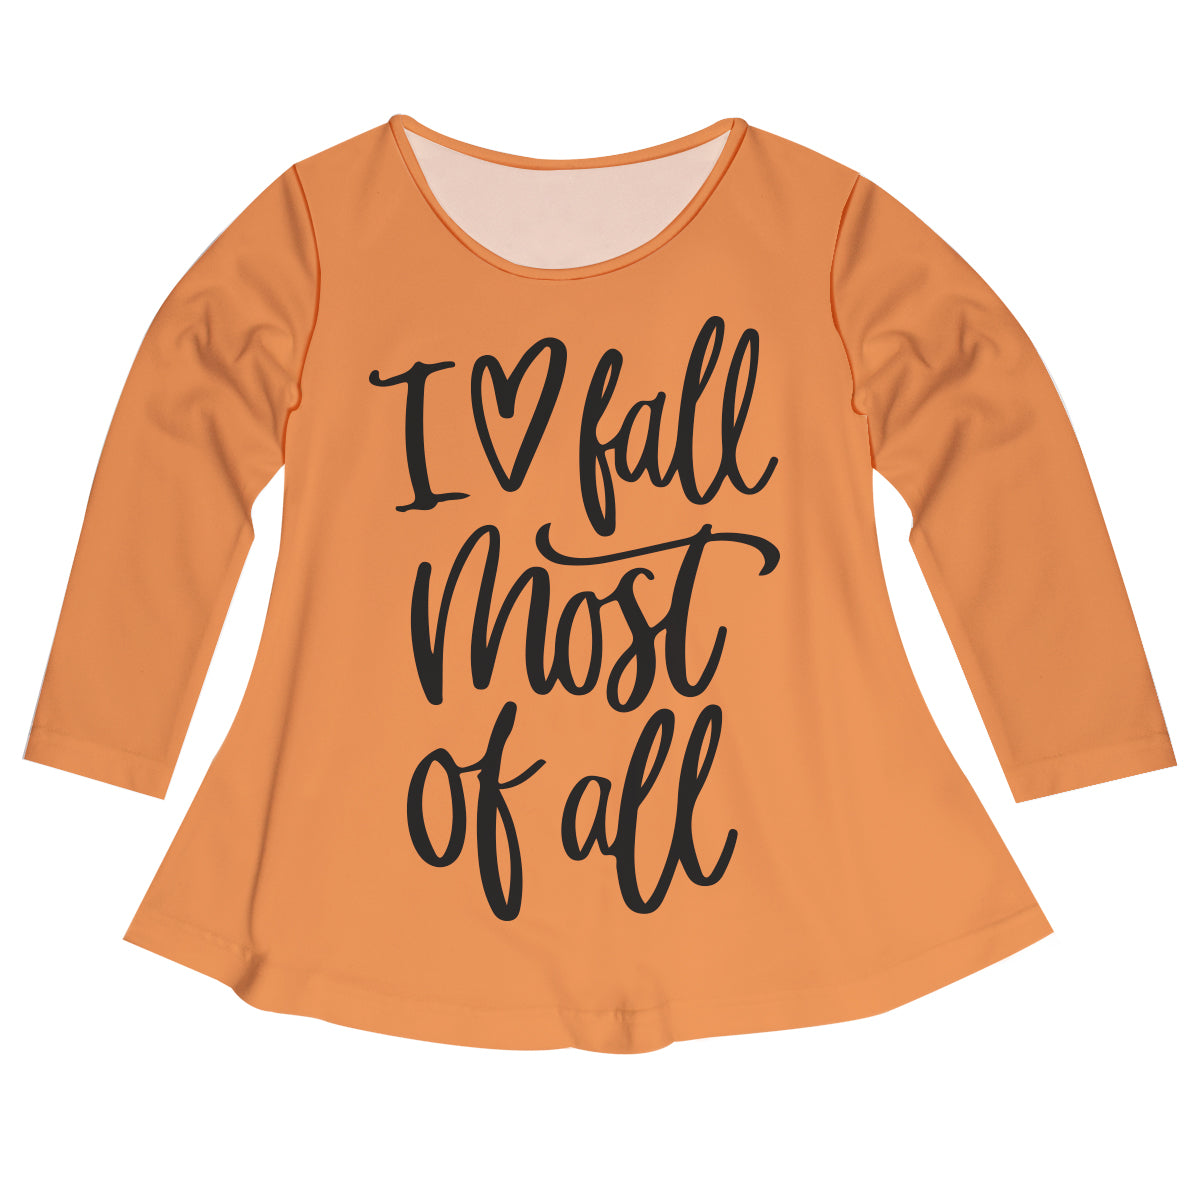 Girls orange and brown fall blouse - Wimziy&Co.